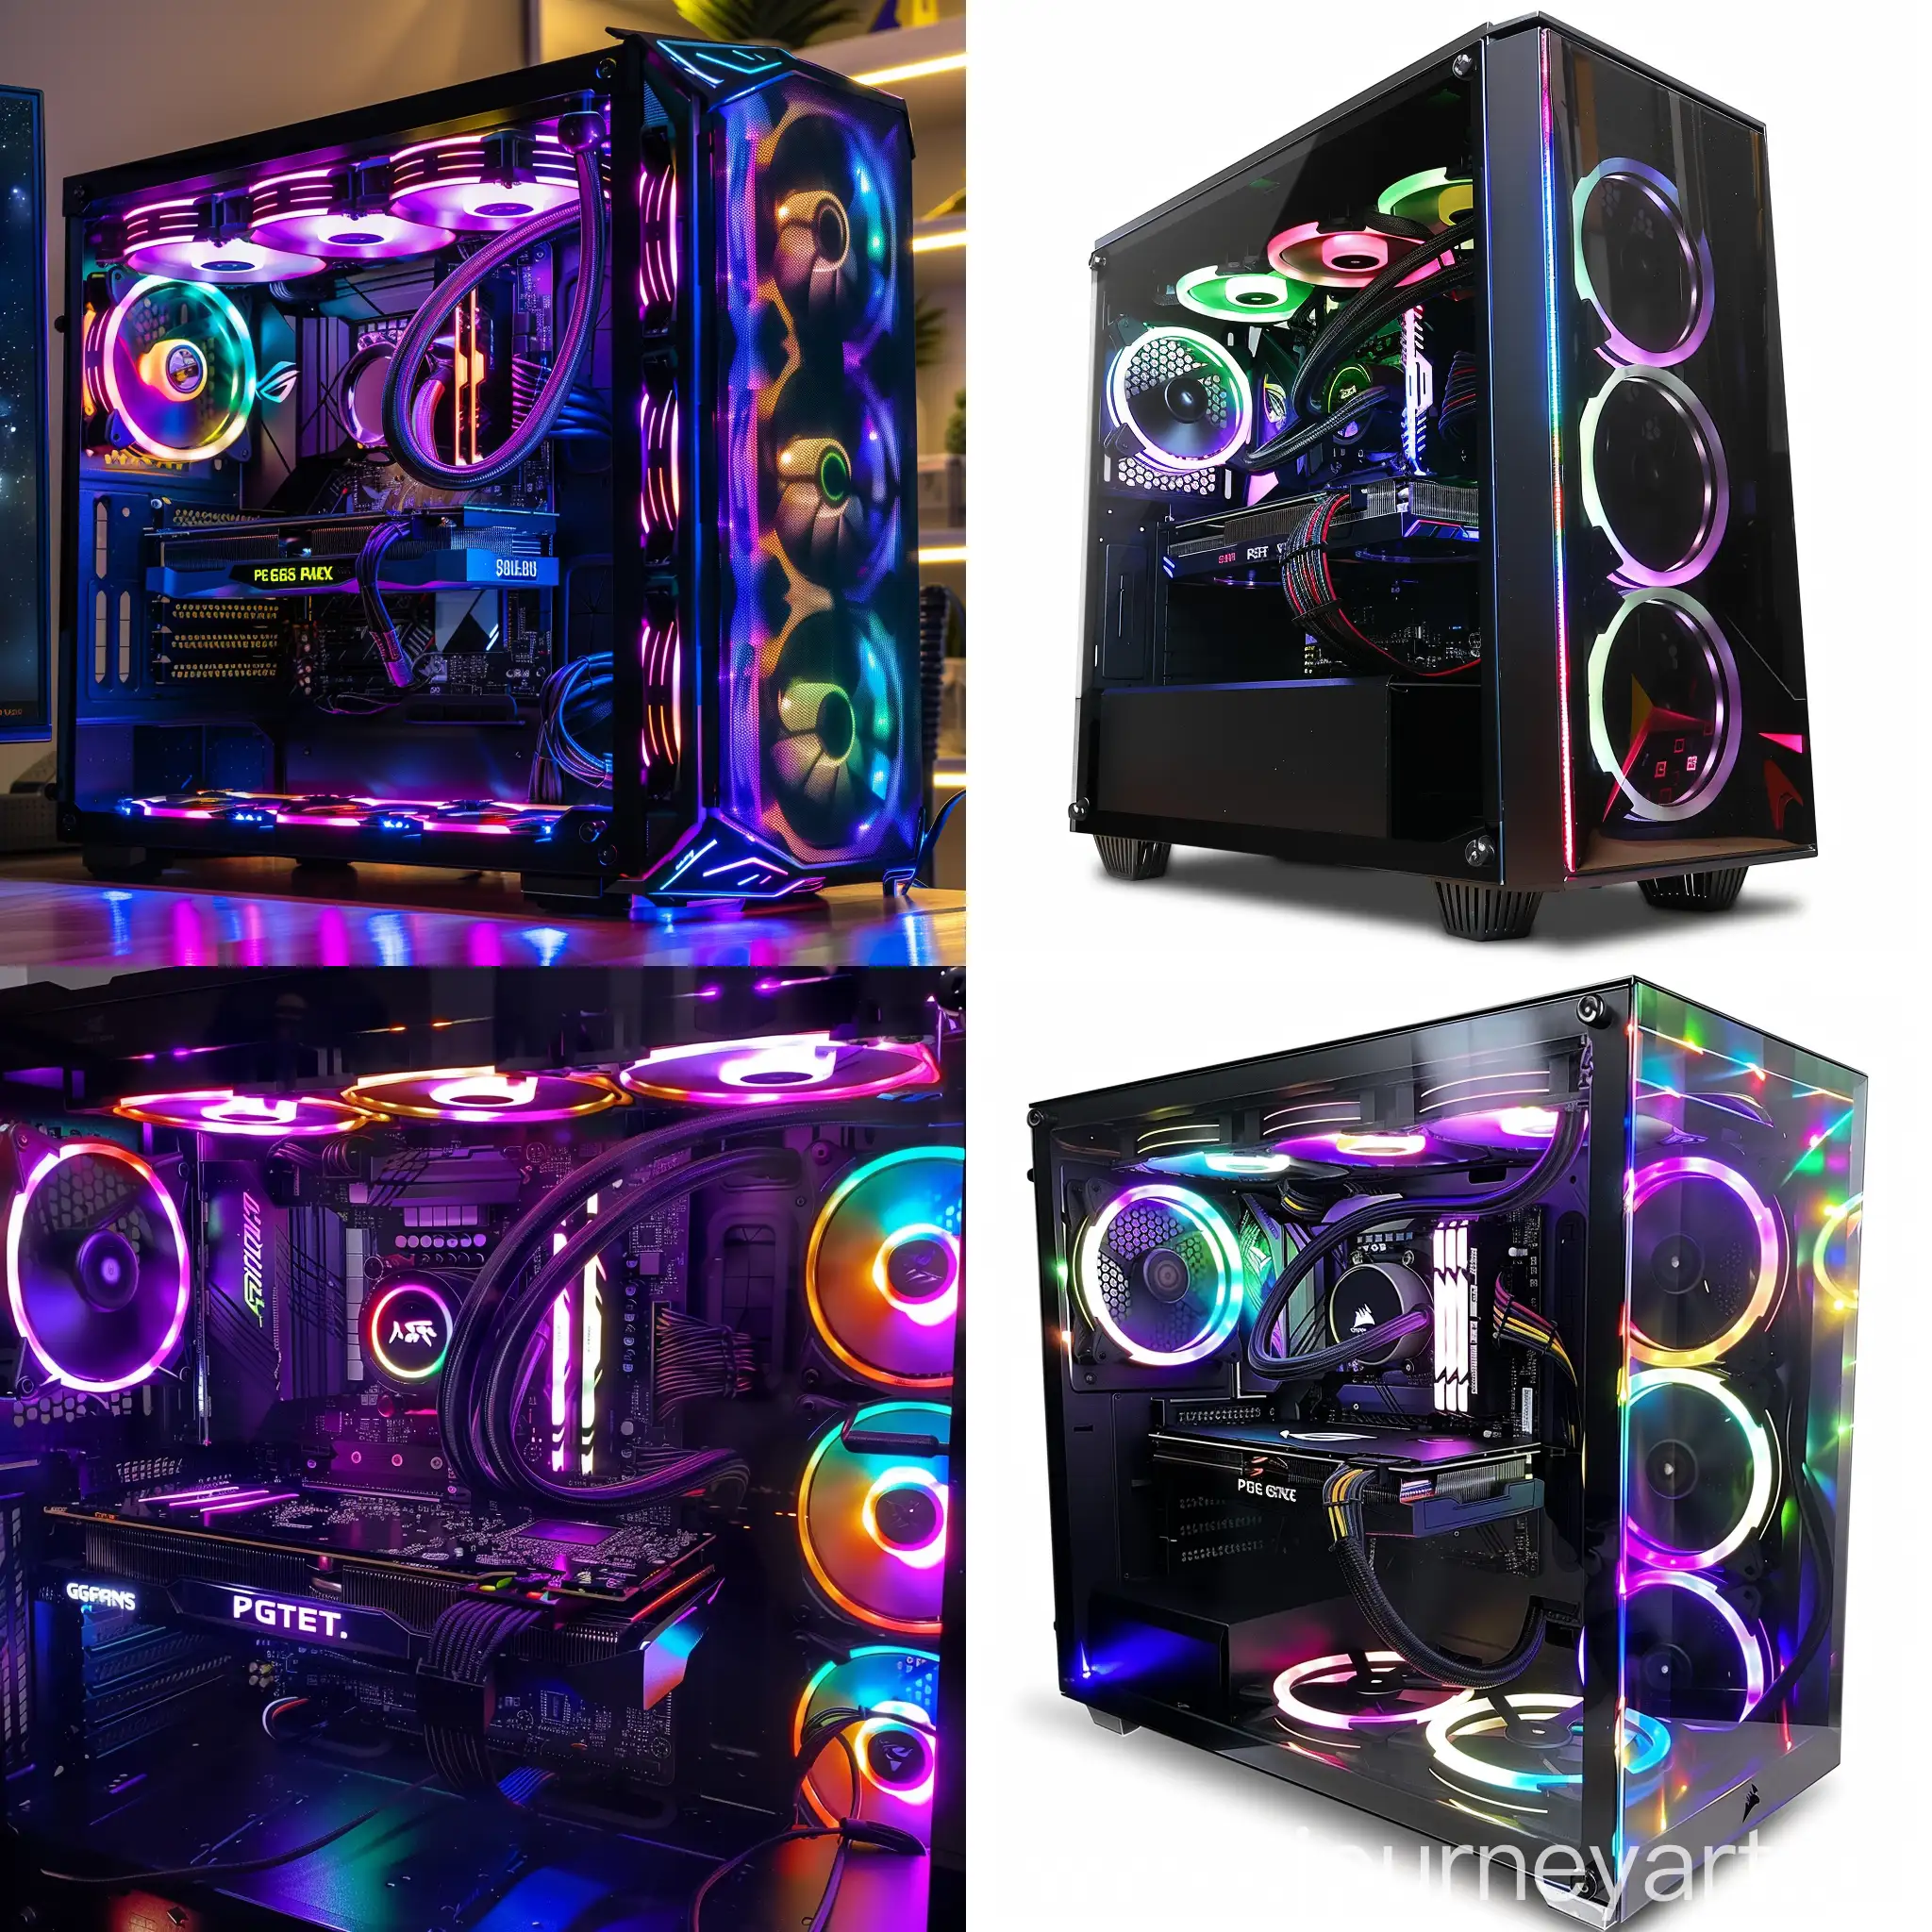 gaming pc with 2 graphics cards for 500000$ (photorealistic)